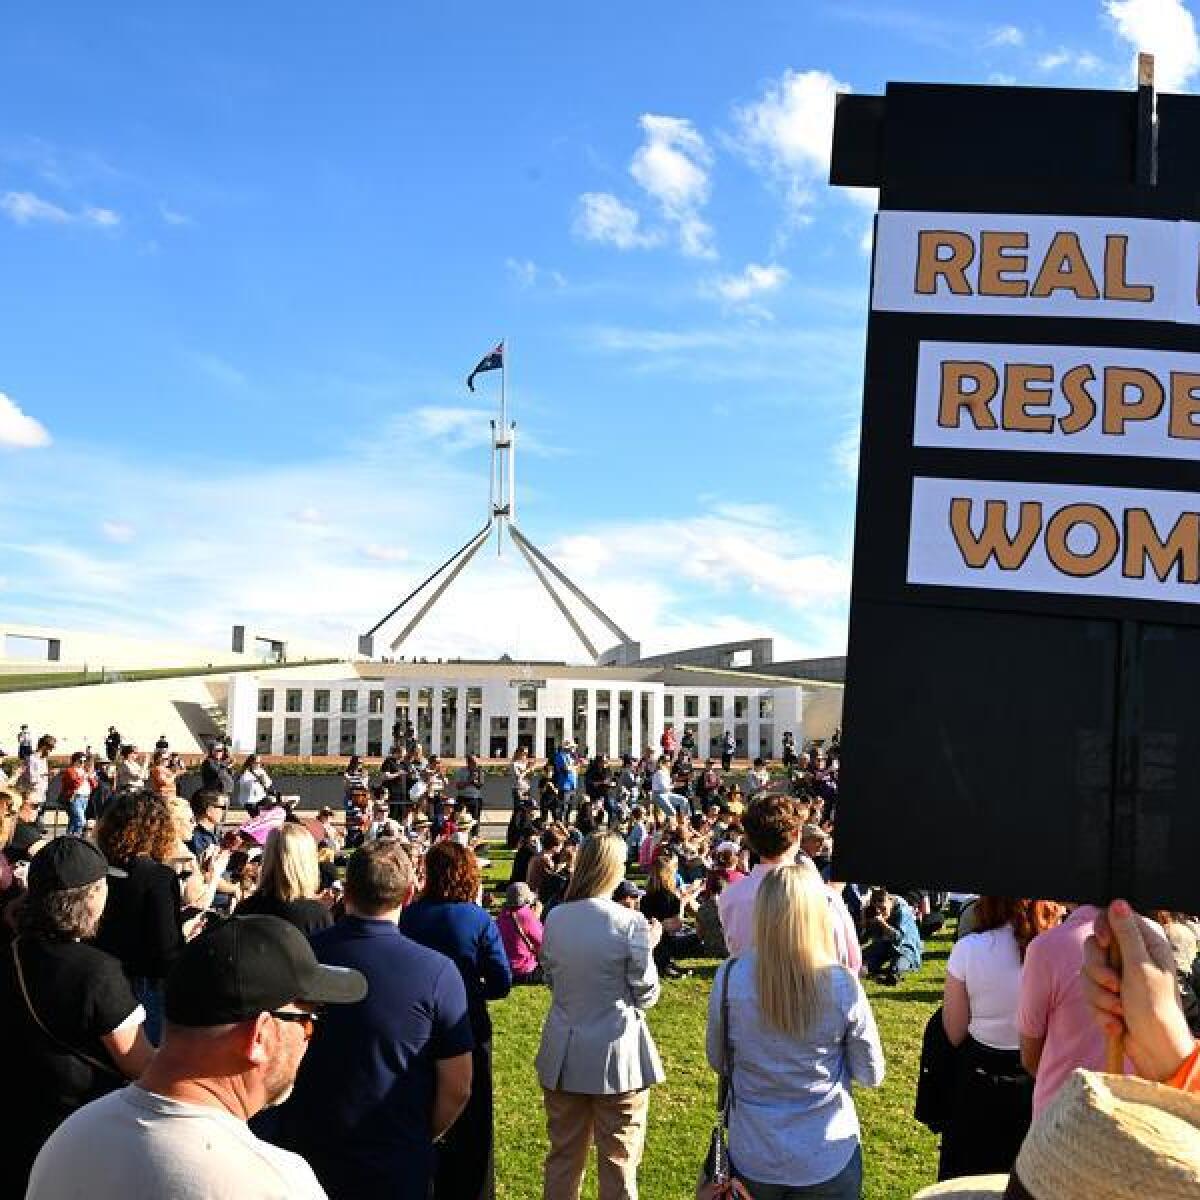 An anti-domestic violence protester holds a sign at a rally.